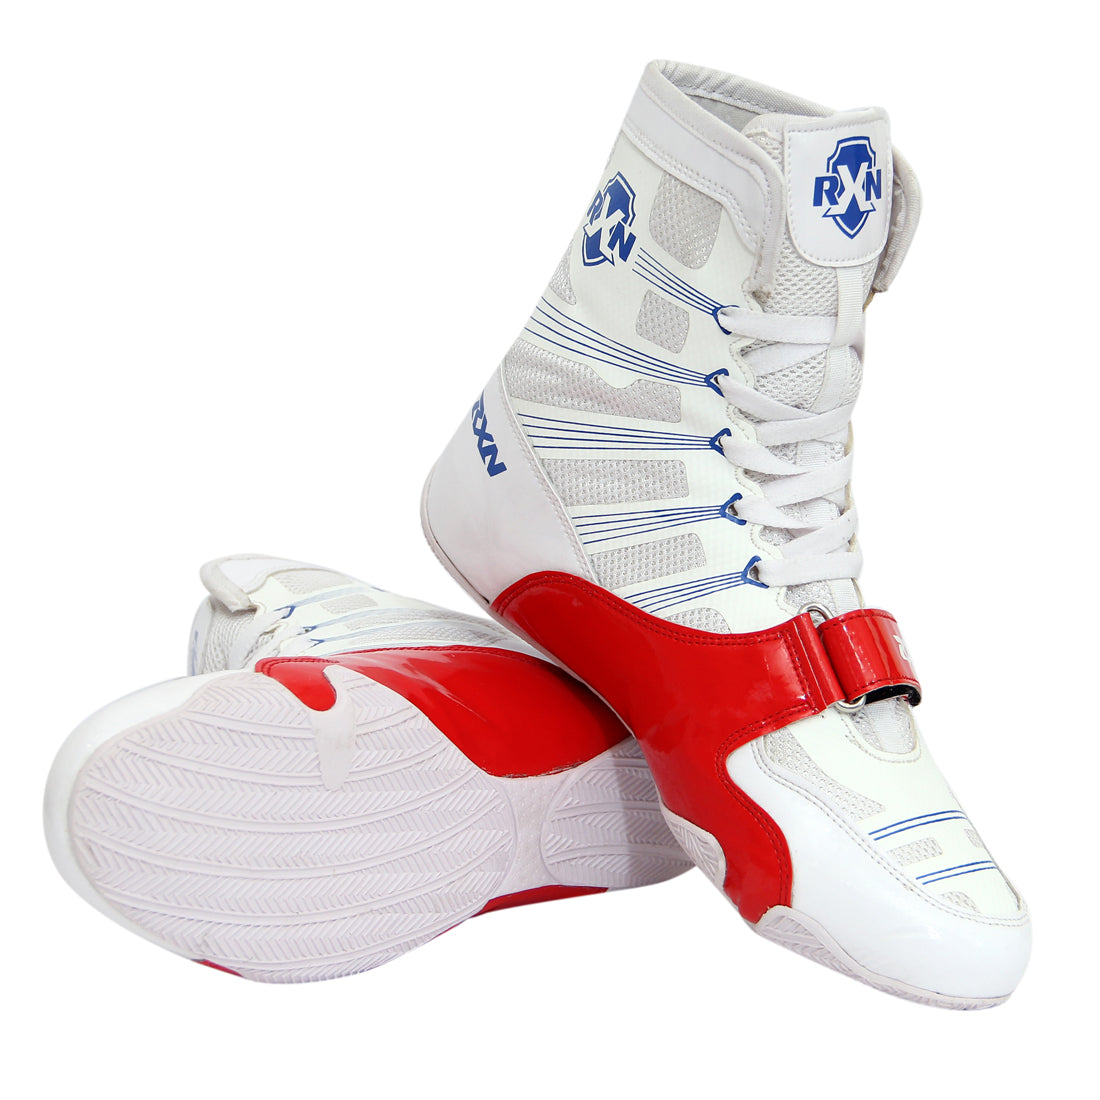 RXN Knockout Boxing Boots (BX-16)